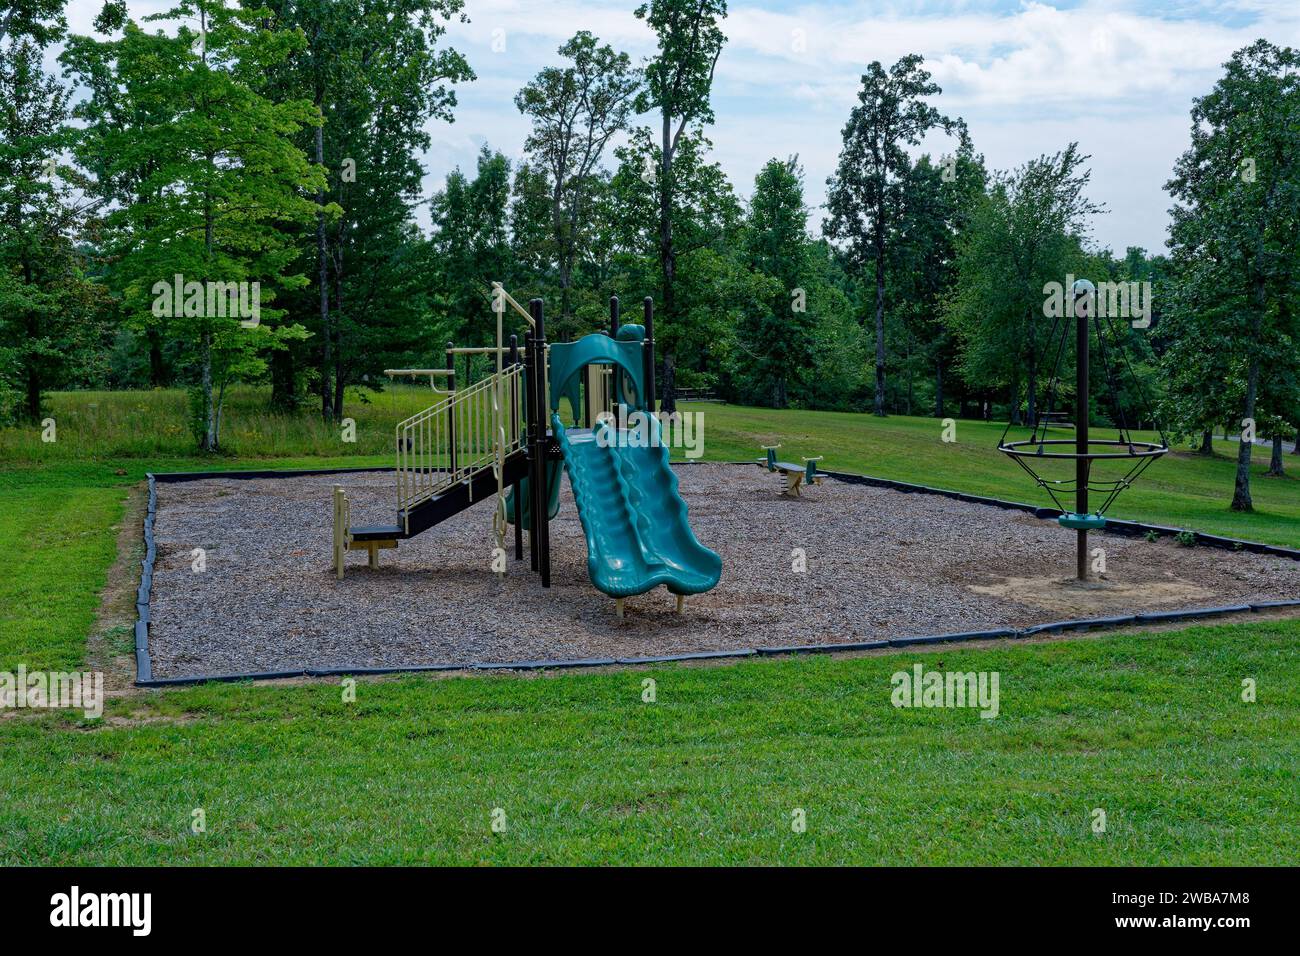 New and clean playground equipment in a empty public park with a forest in the background in late summertime Stock Photo